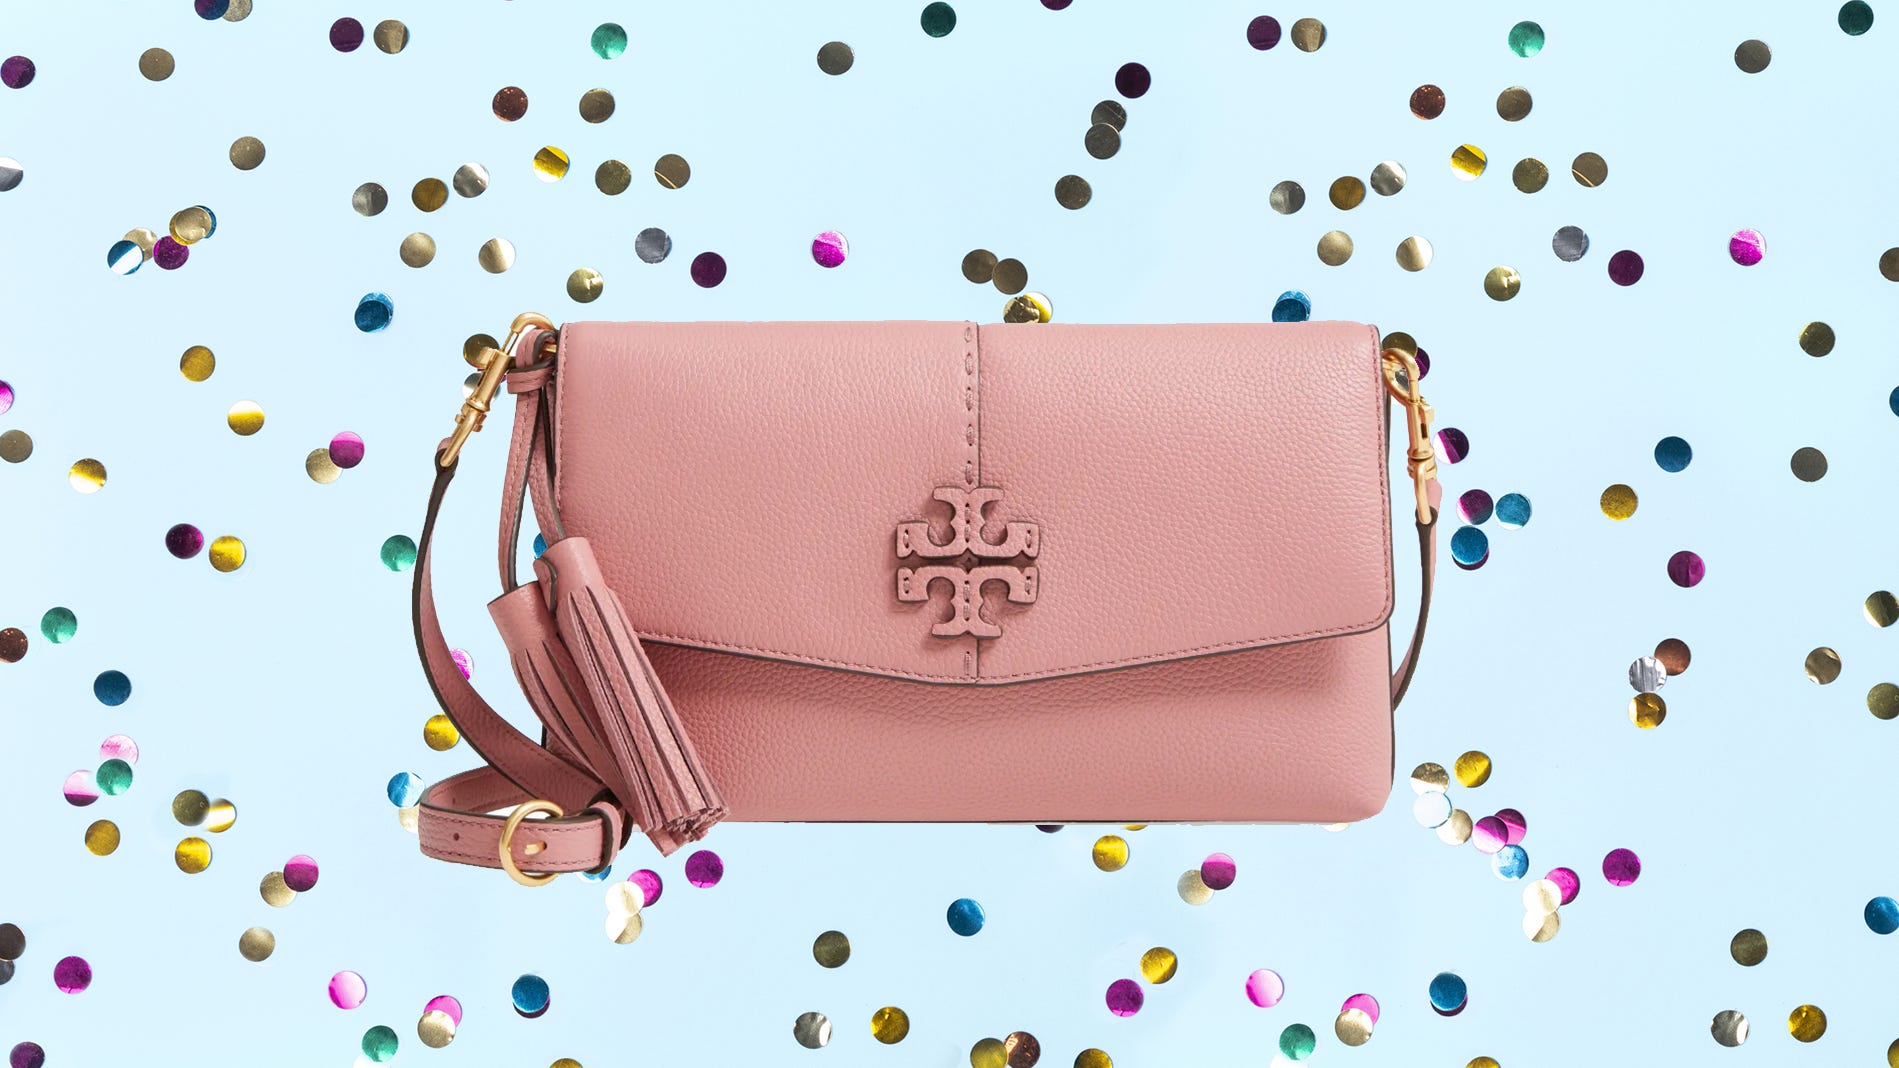 Nordstrom Anniversary Sale 2021: Grab a Tory Burch purse on sale right now